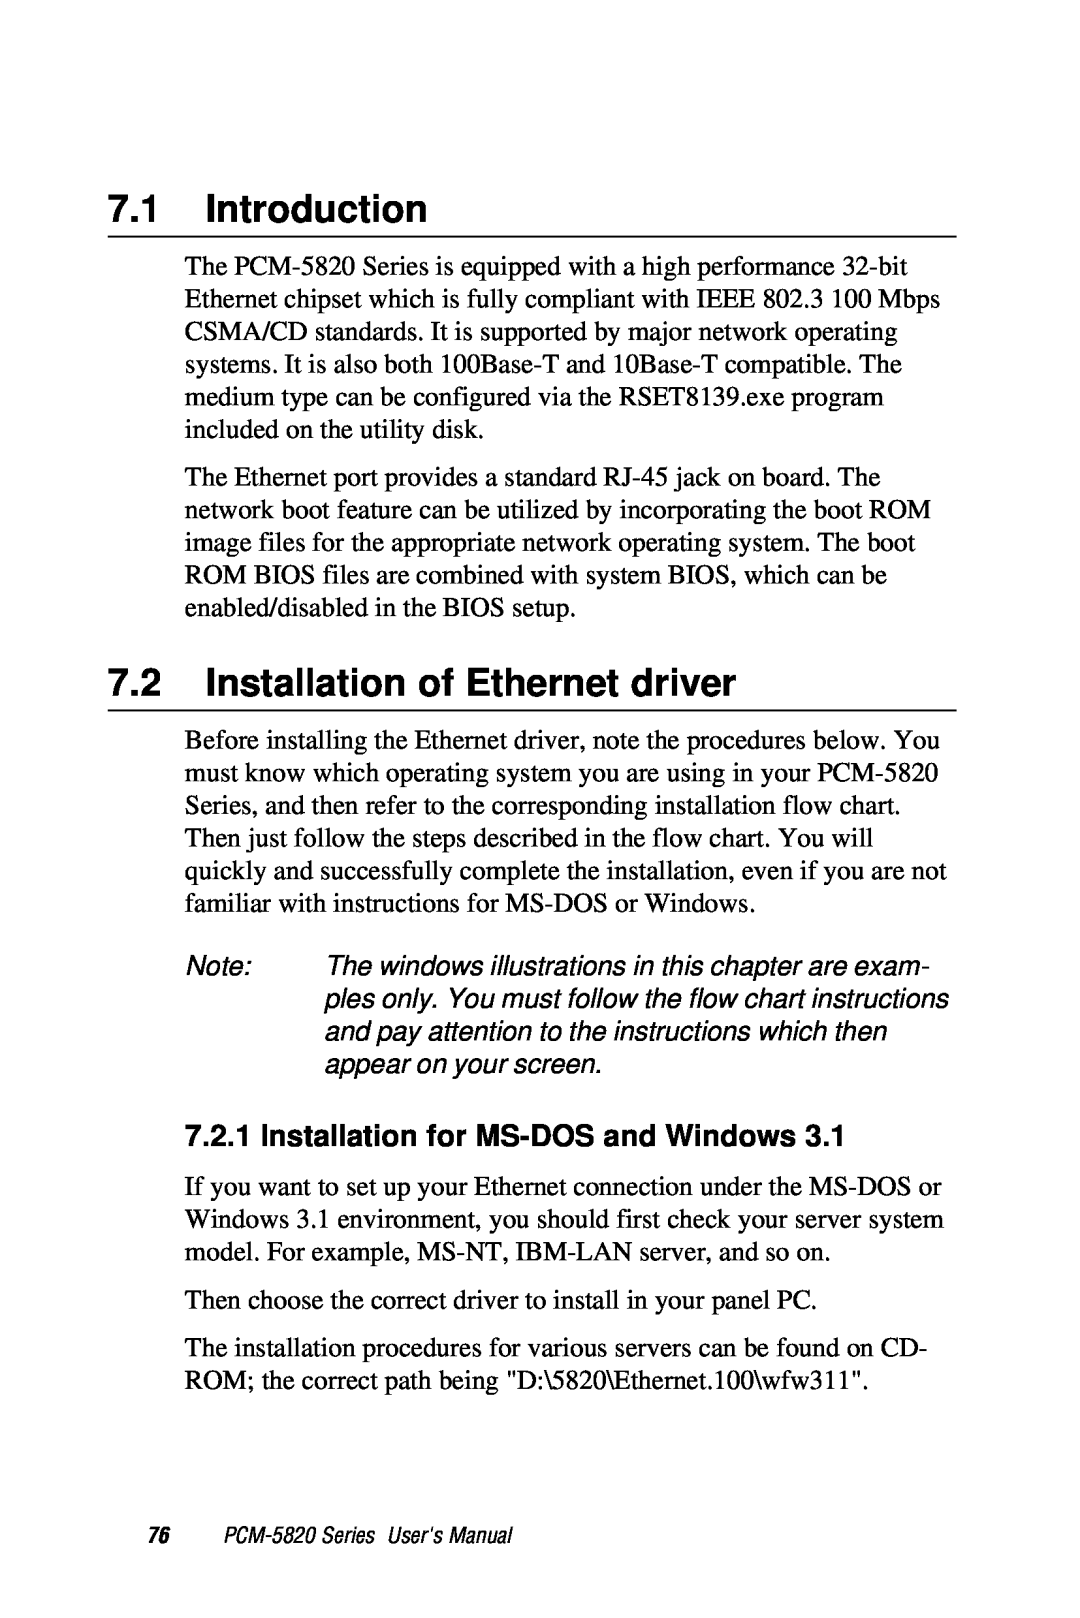 AMD PCM-5820 manual Introduction, Installation of Ethernet driver, Installation for MS-DOS and Windows 